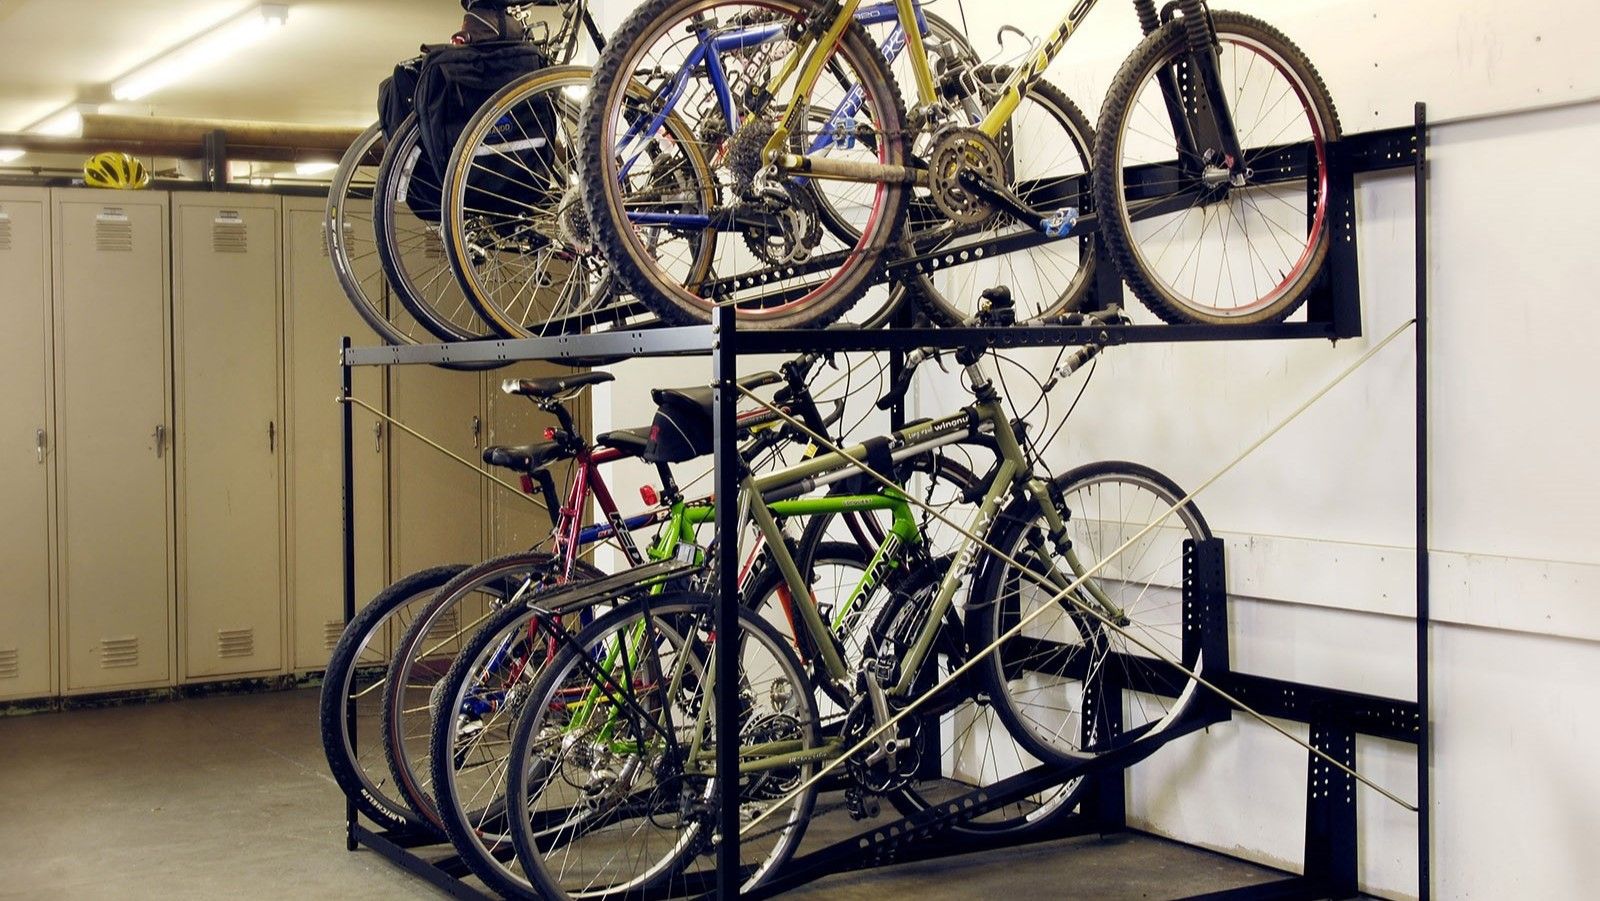 locker room with double stacked bike storage rack for 10 bikes